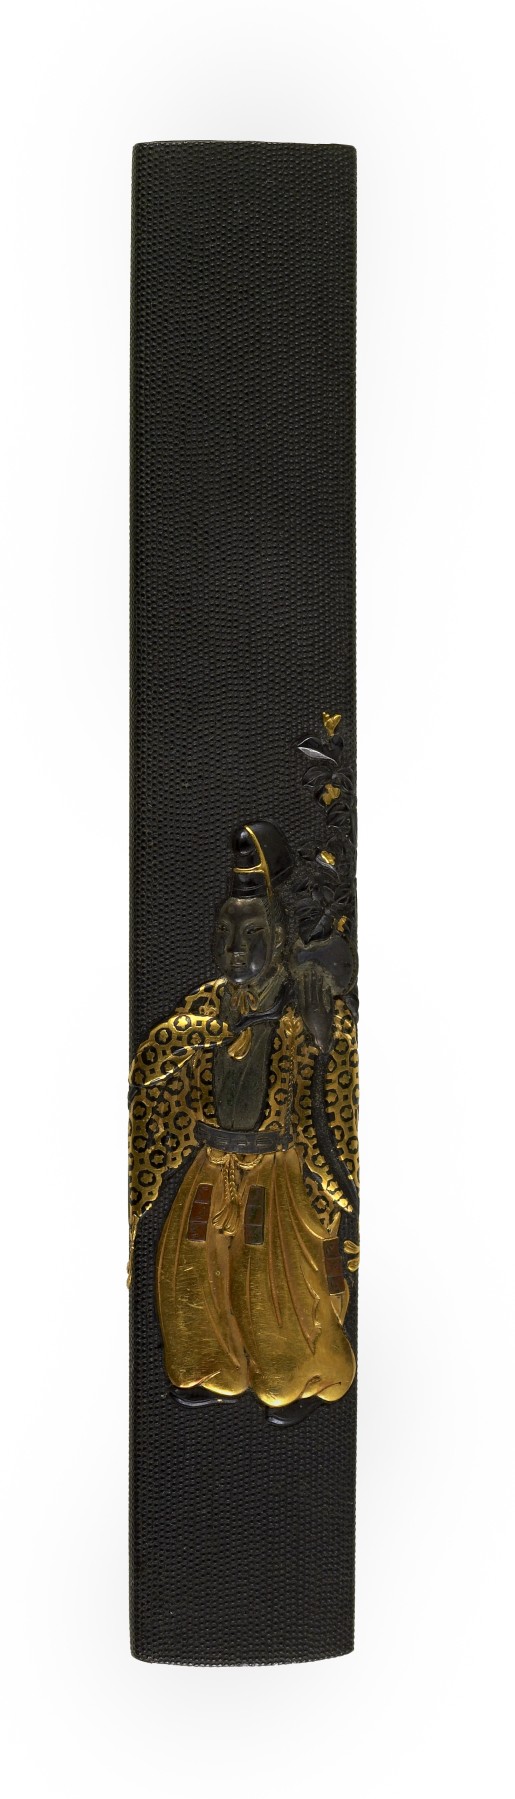 Image for Kozuka with a Figure in Heian Period Court Dress